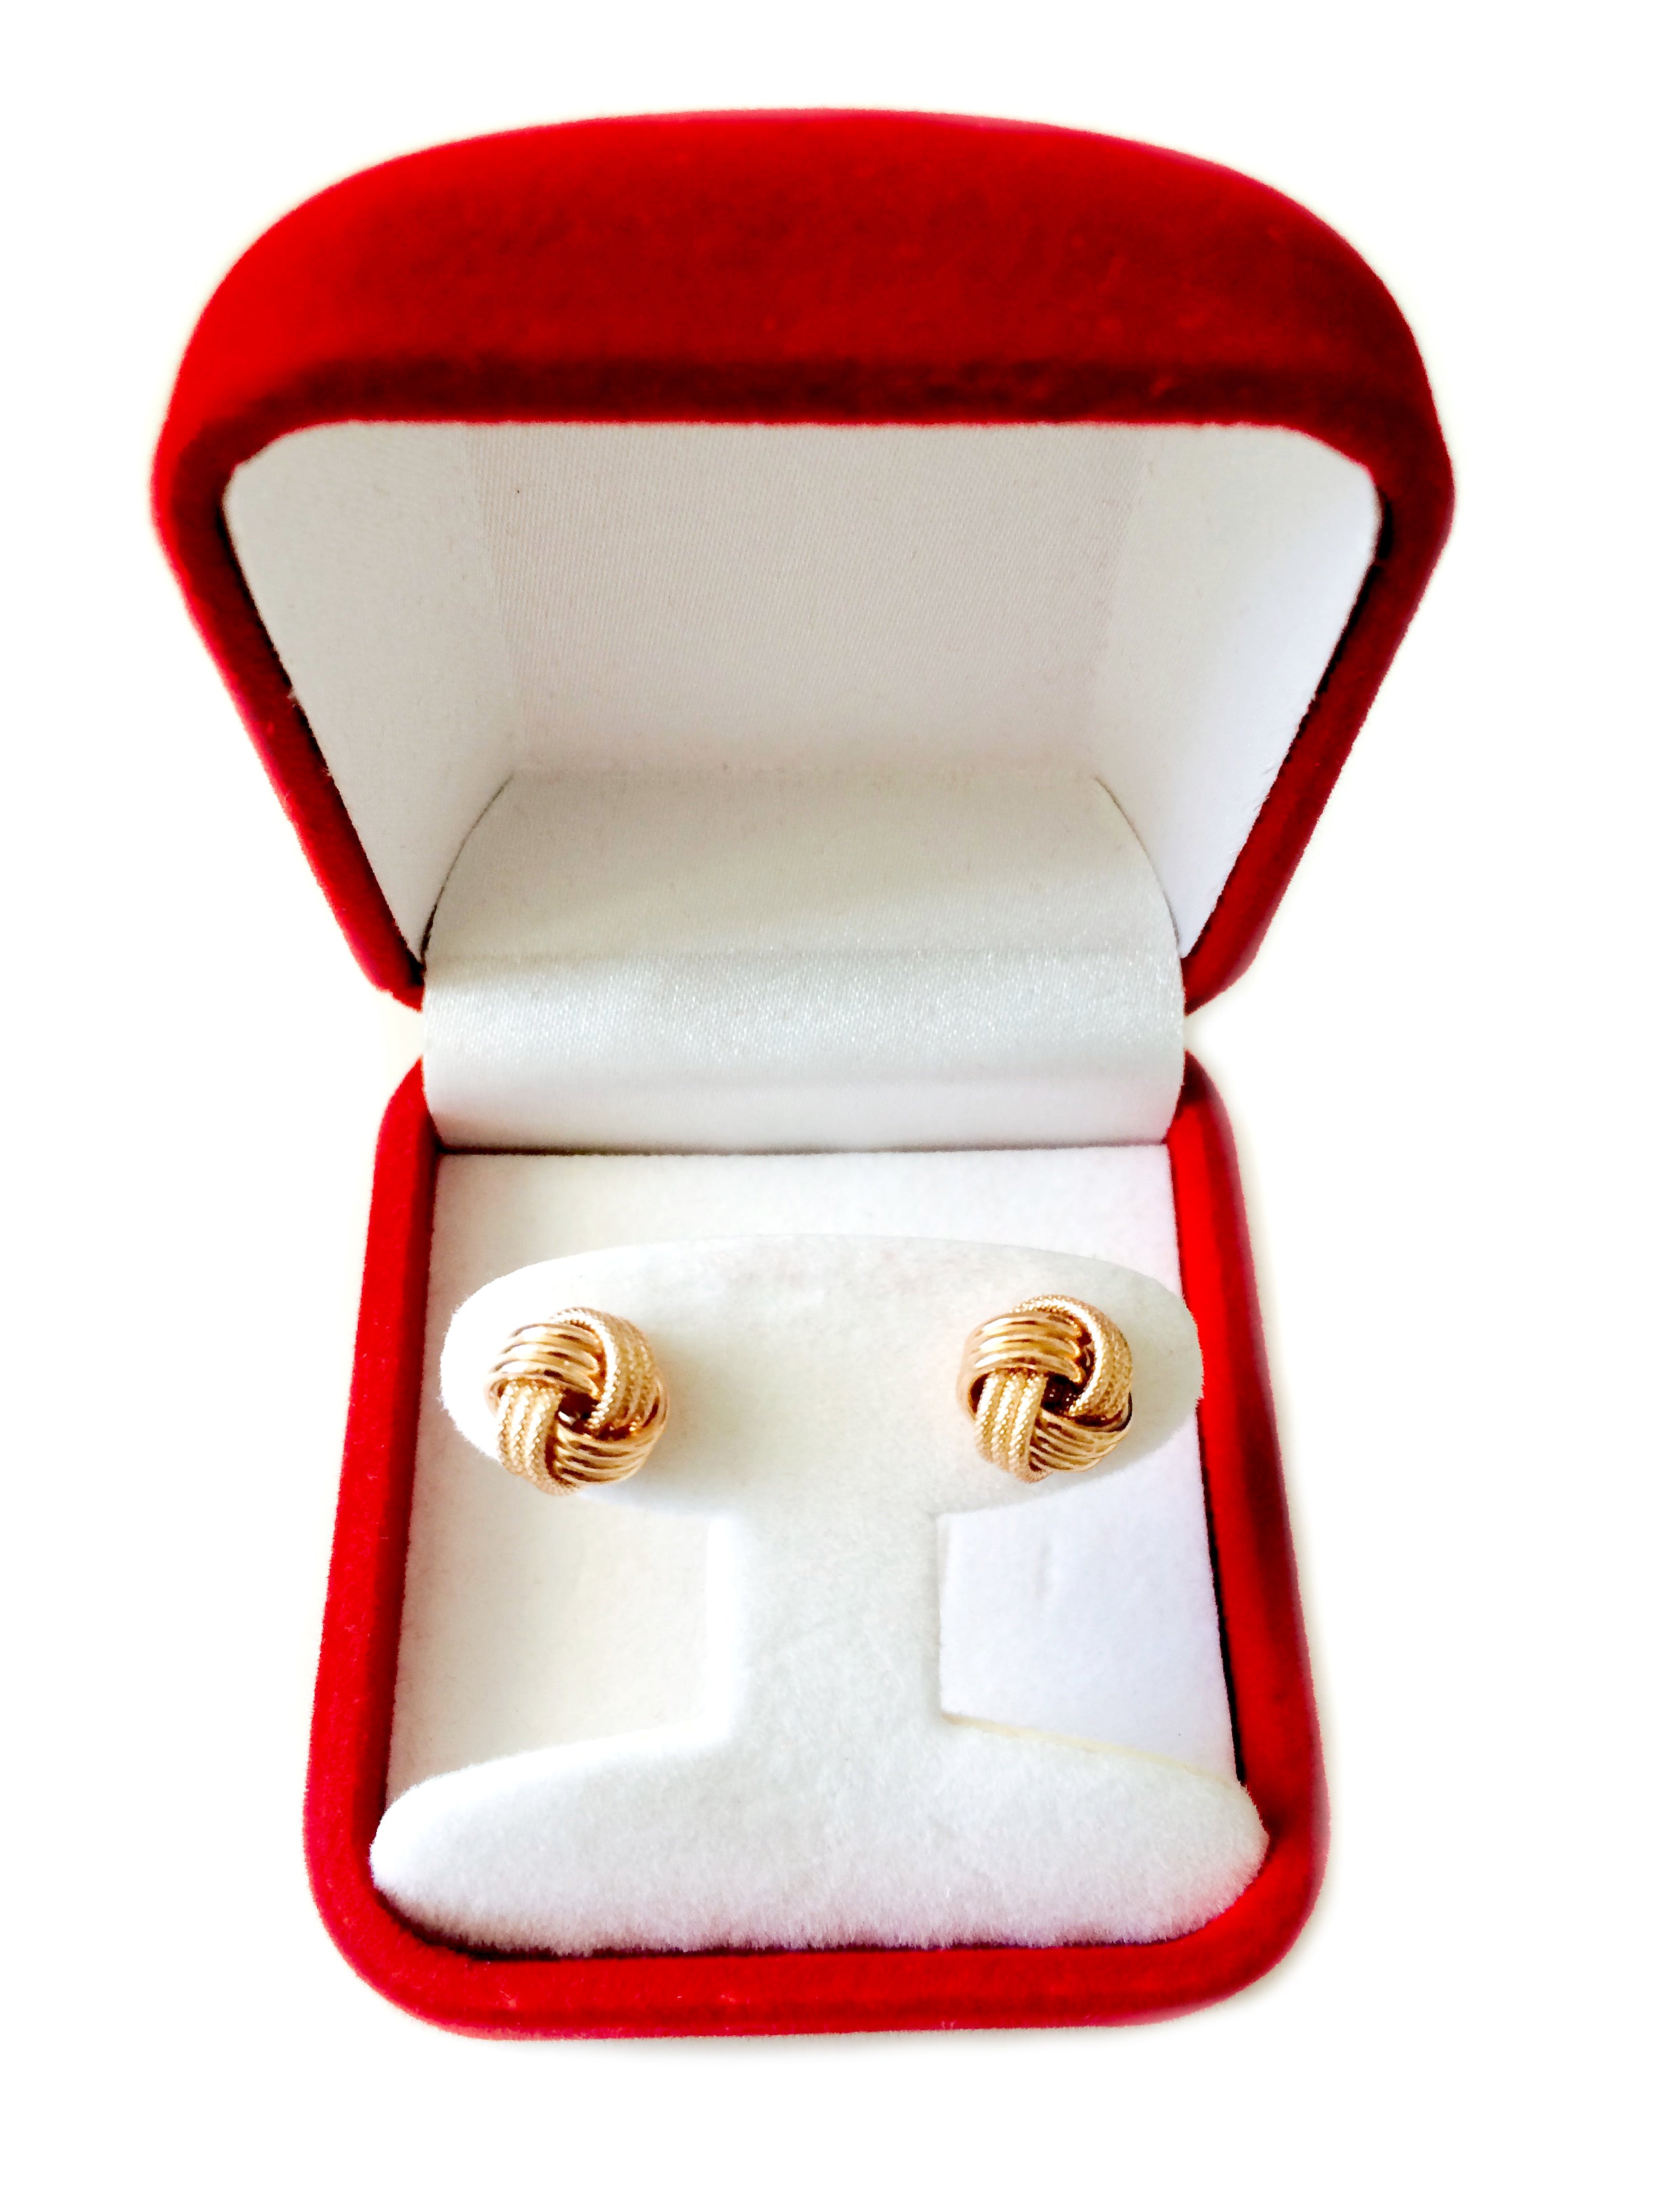 14k Gold Shiny And Textured Triple Row Love Knot Stud Earrings, 10mm ...